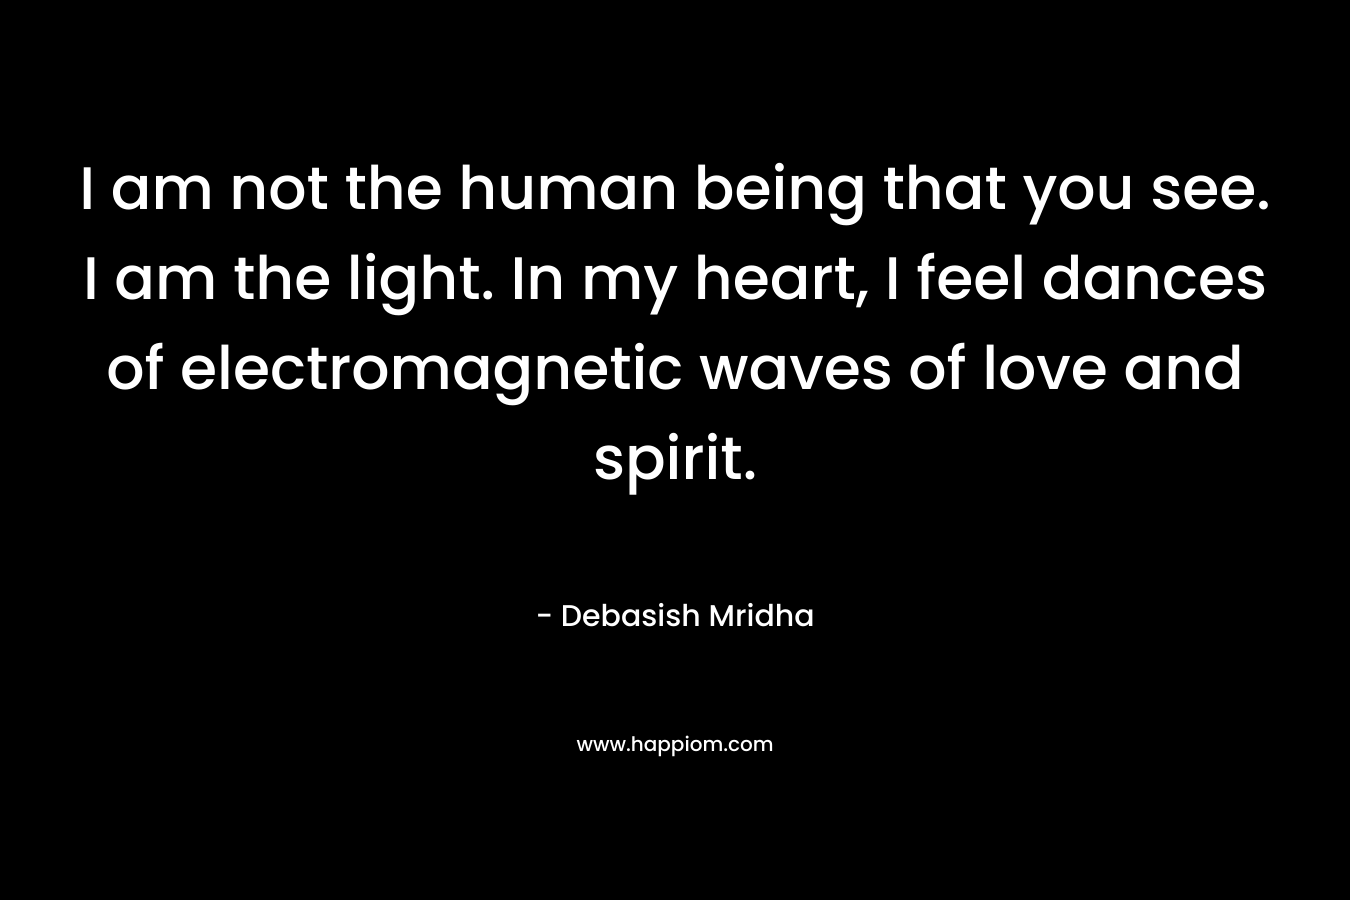 I am not the human being that you see. I am the light. In my heart, I feel dances of electromagnetic waves of love and spirit.